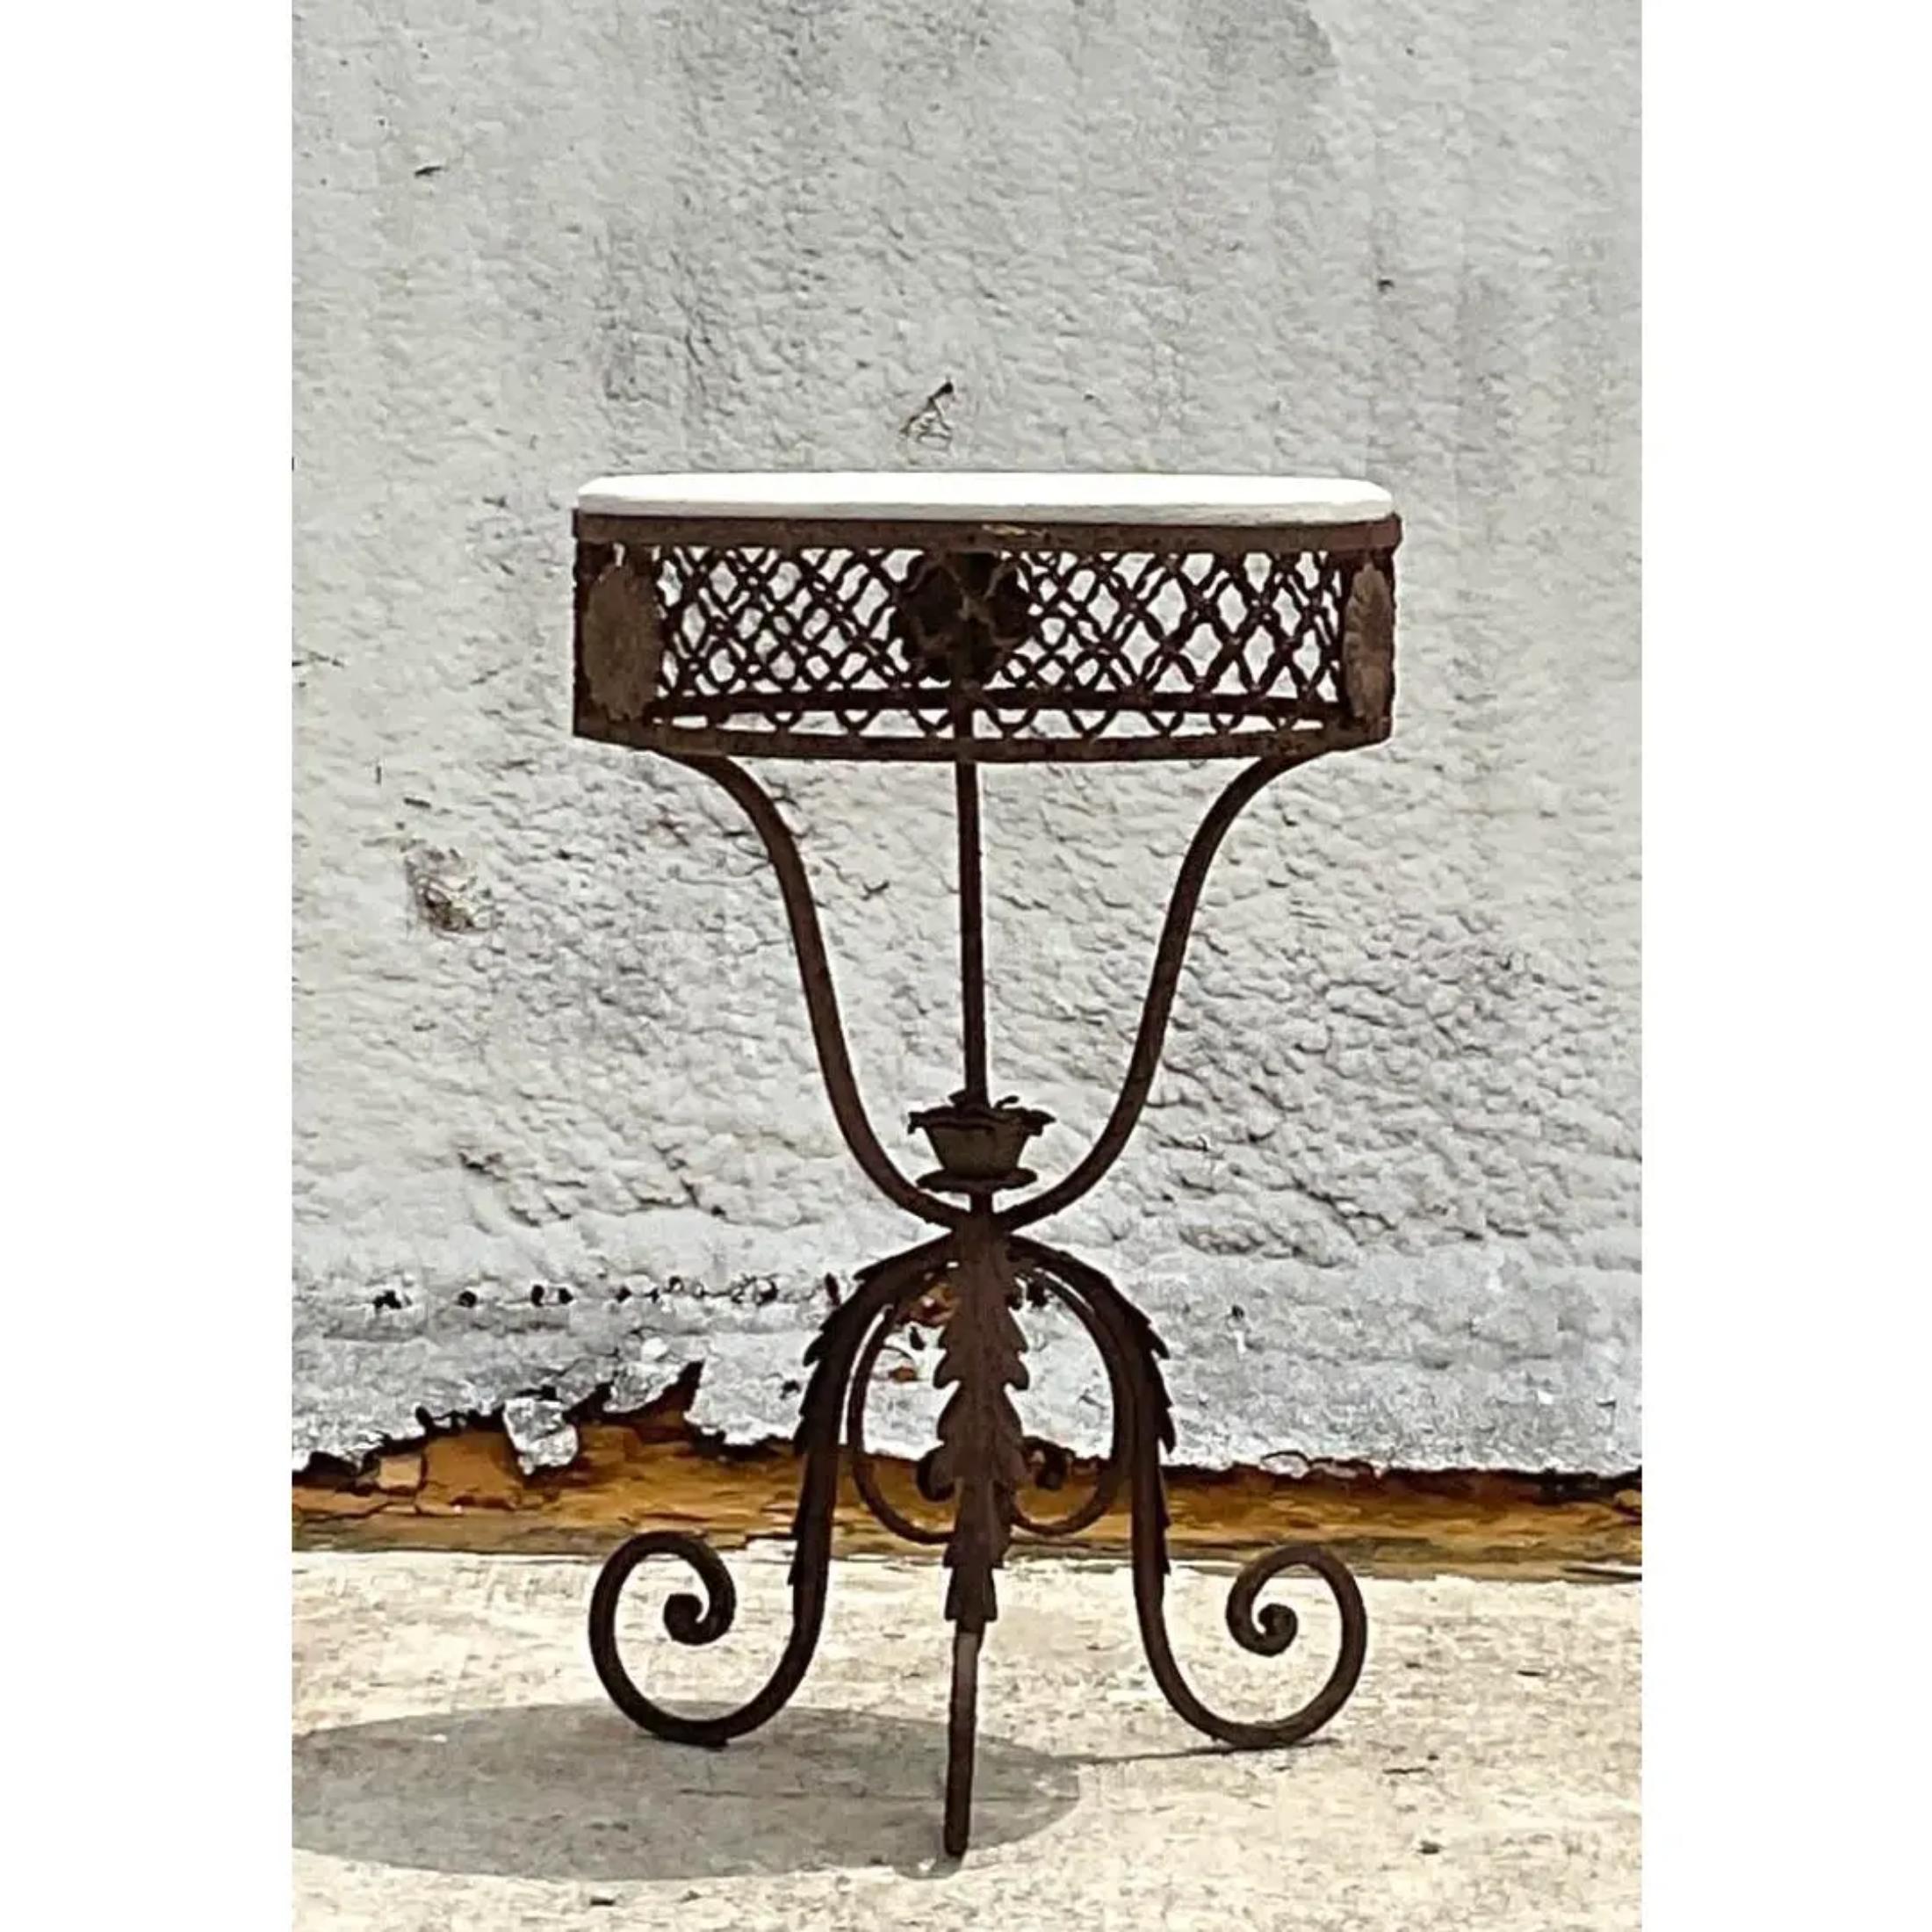 This side table is an elaborate vintage wrought iron table with a floral design and a marble top. Gorgeous all over patina from time. Perfect for a romantic garden moment. Acquired at a Palm Beach estate